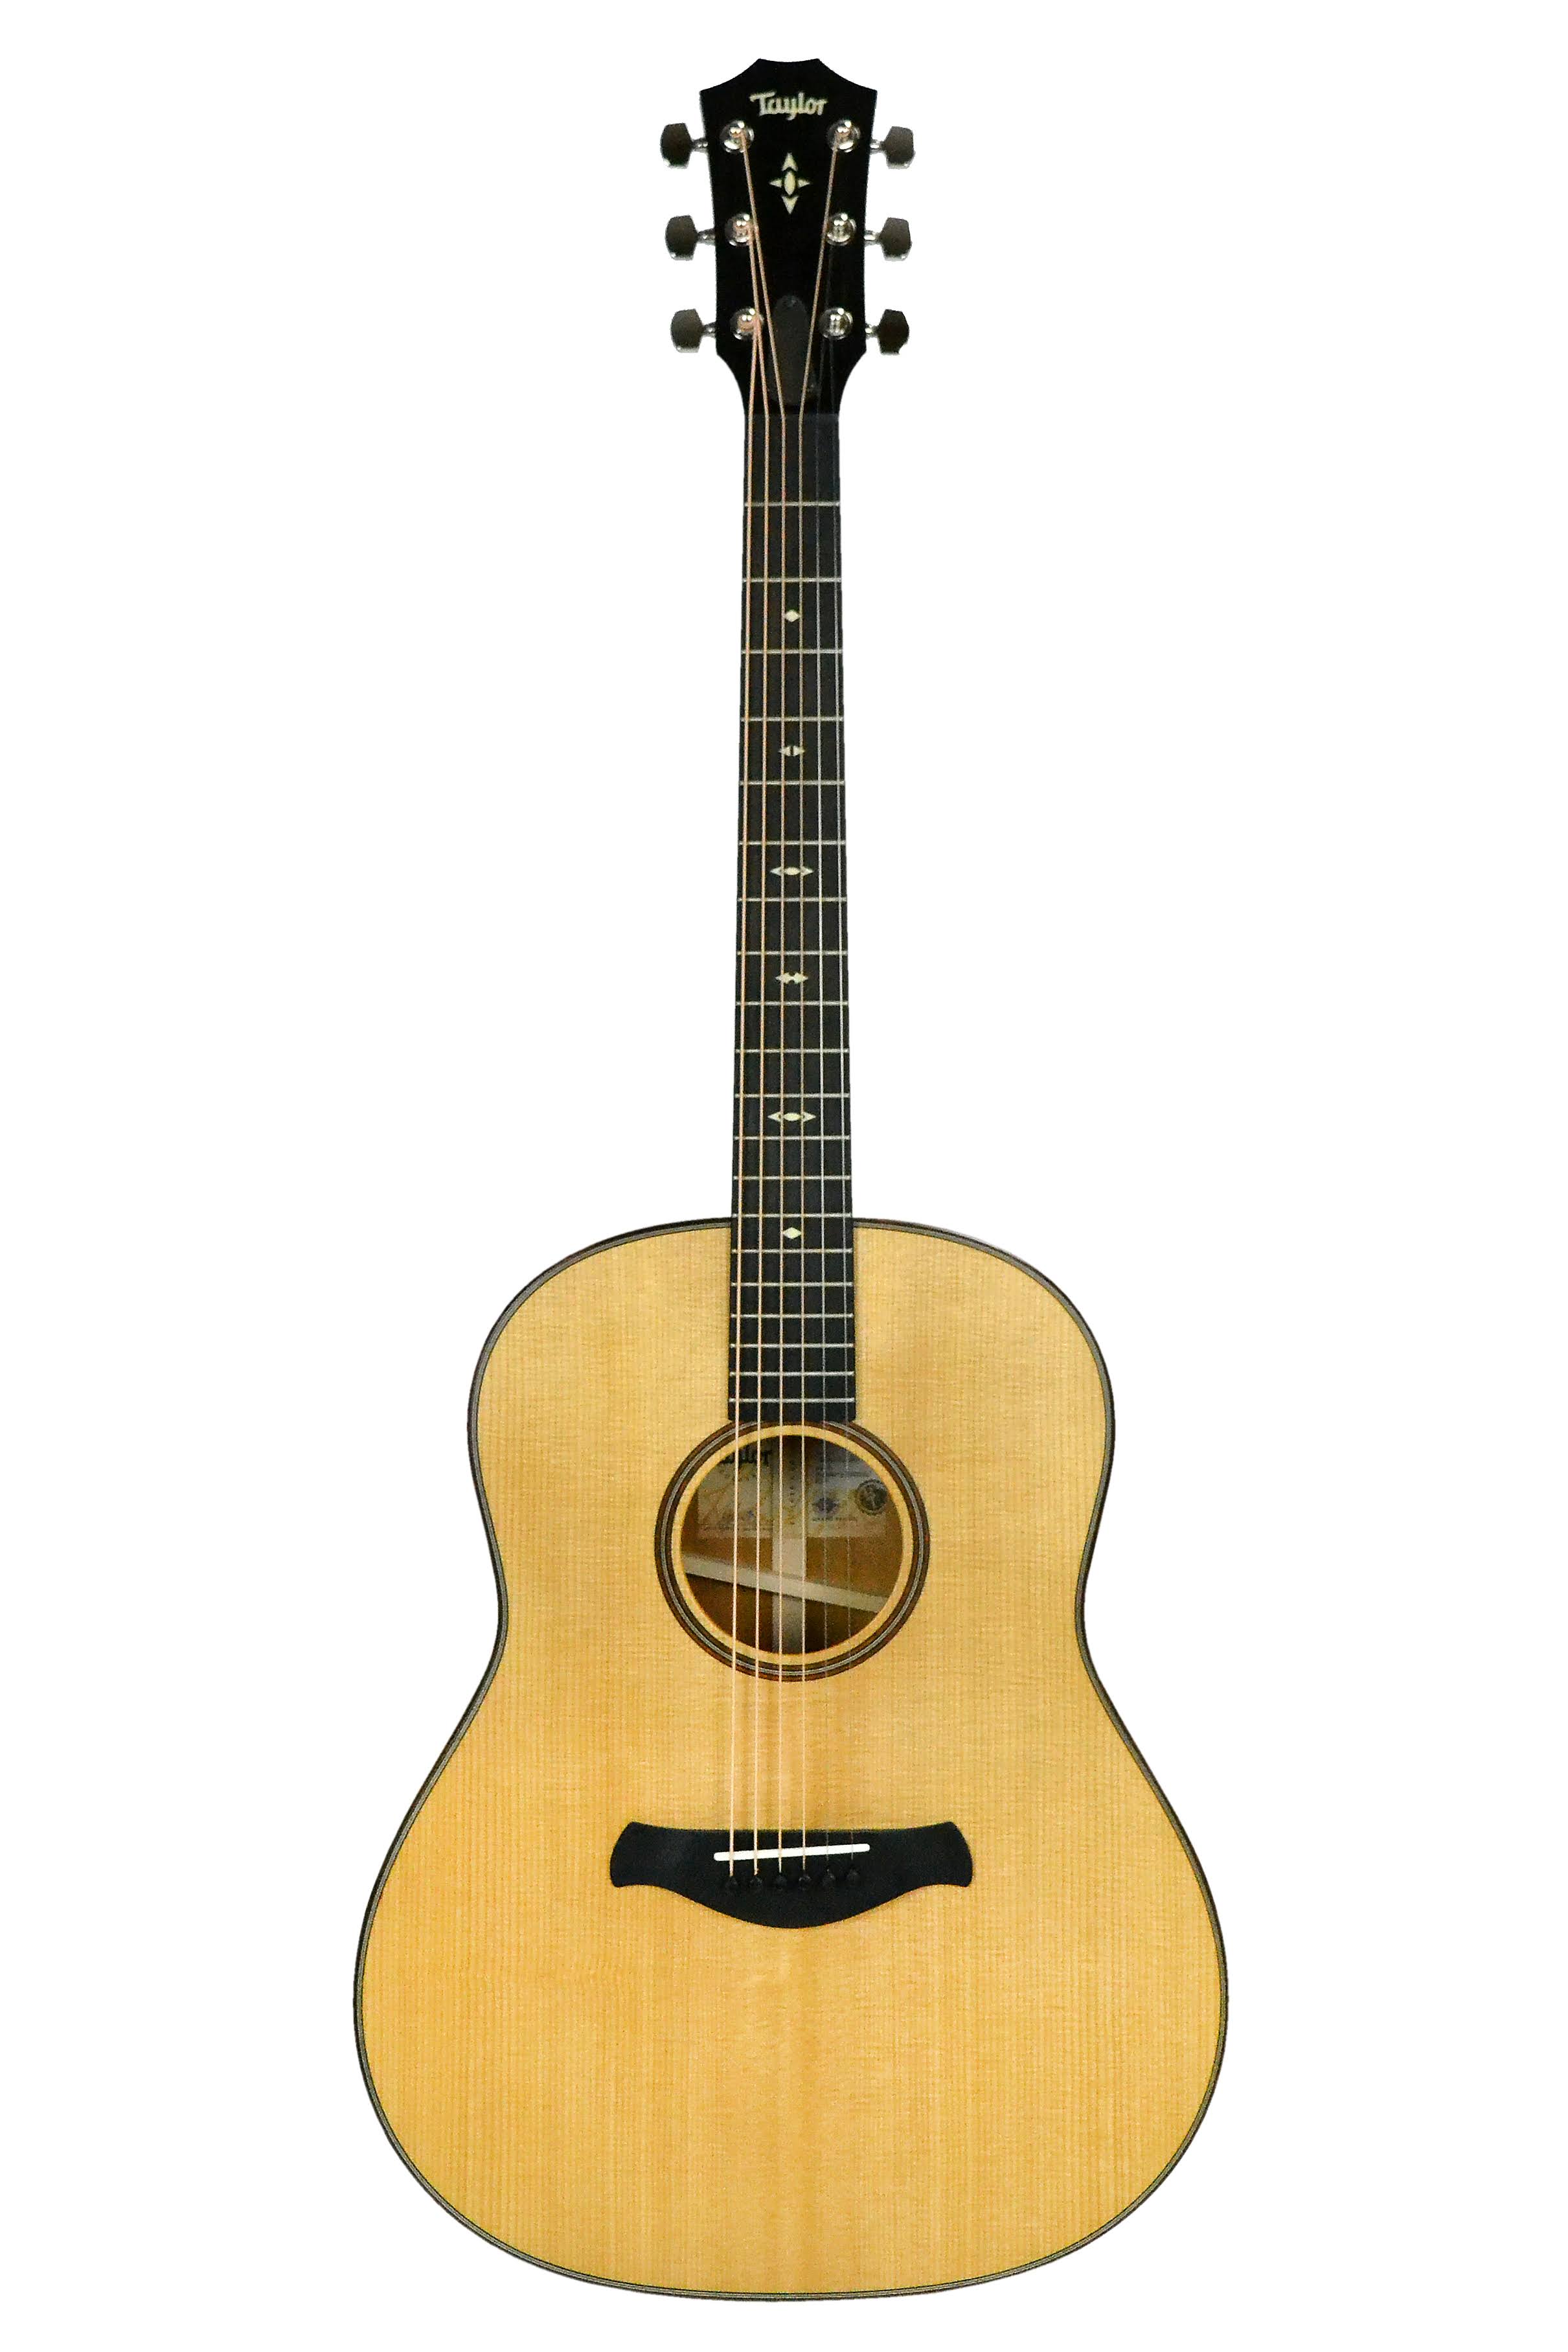 Taylor Builder's Edition 517